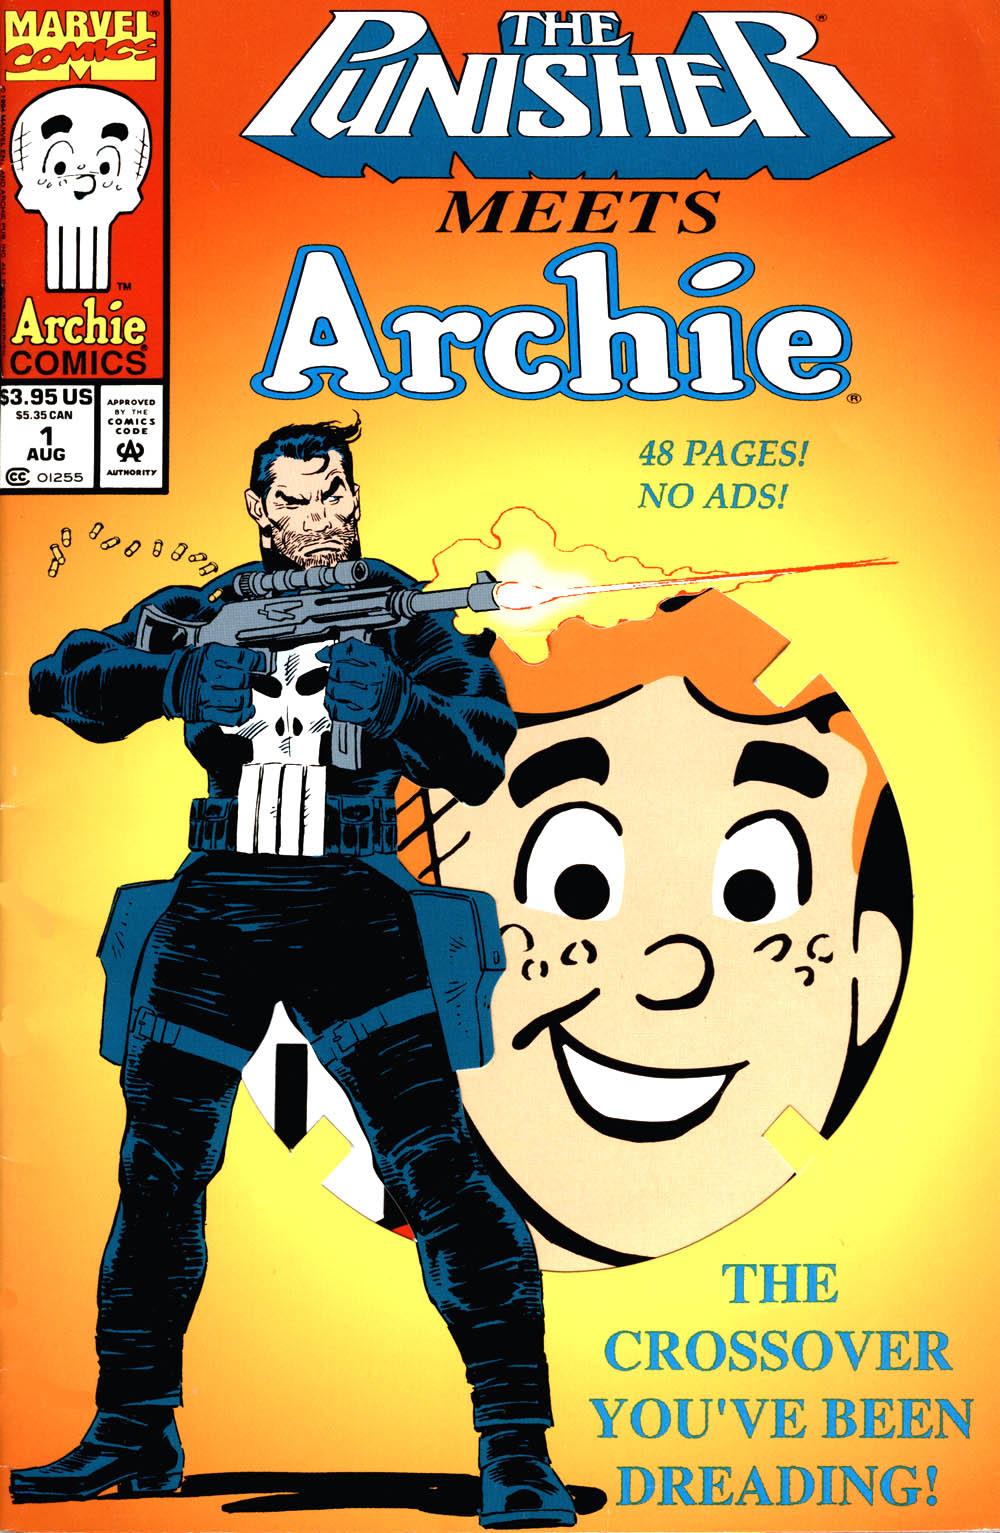 The Punisher Meets Archie Vol. 1 #1